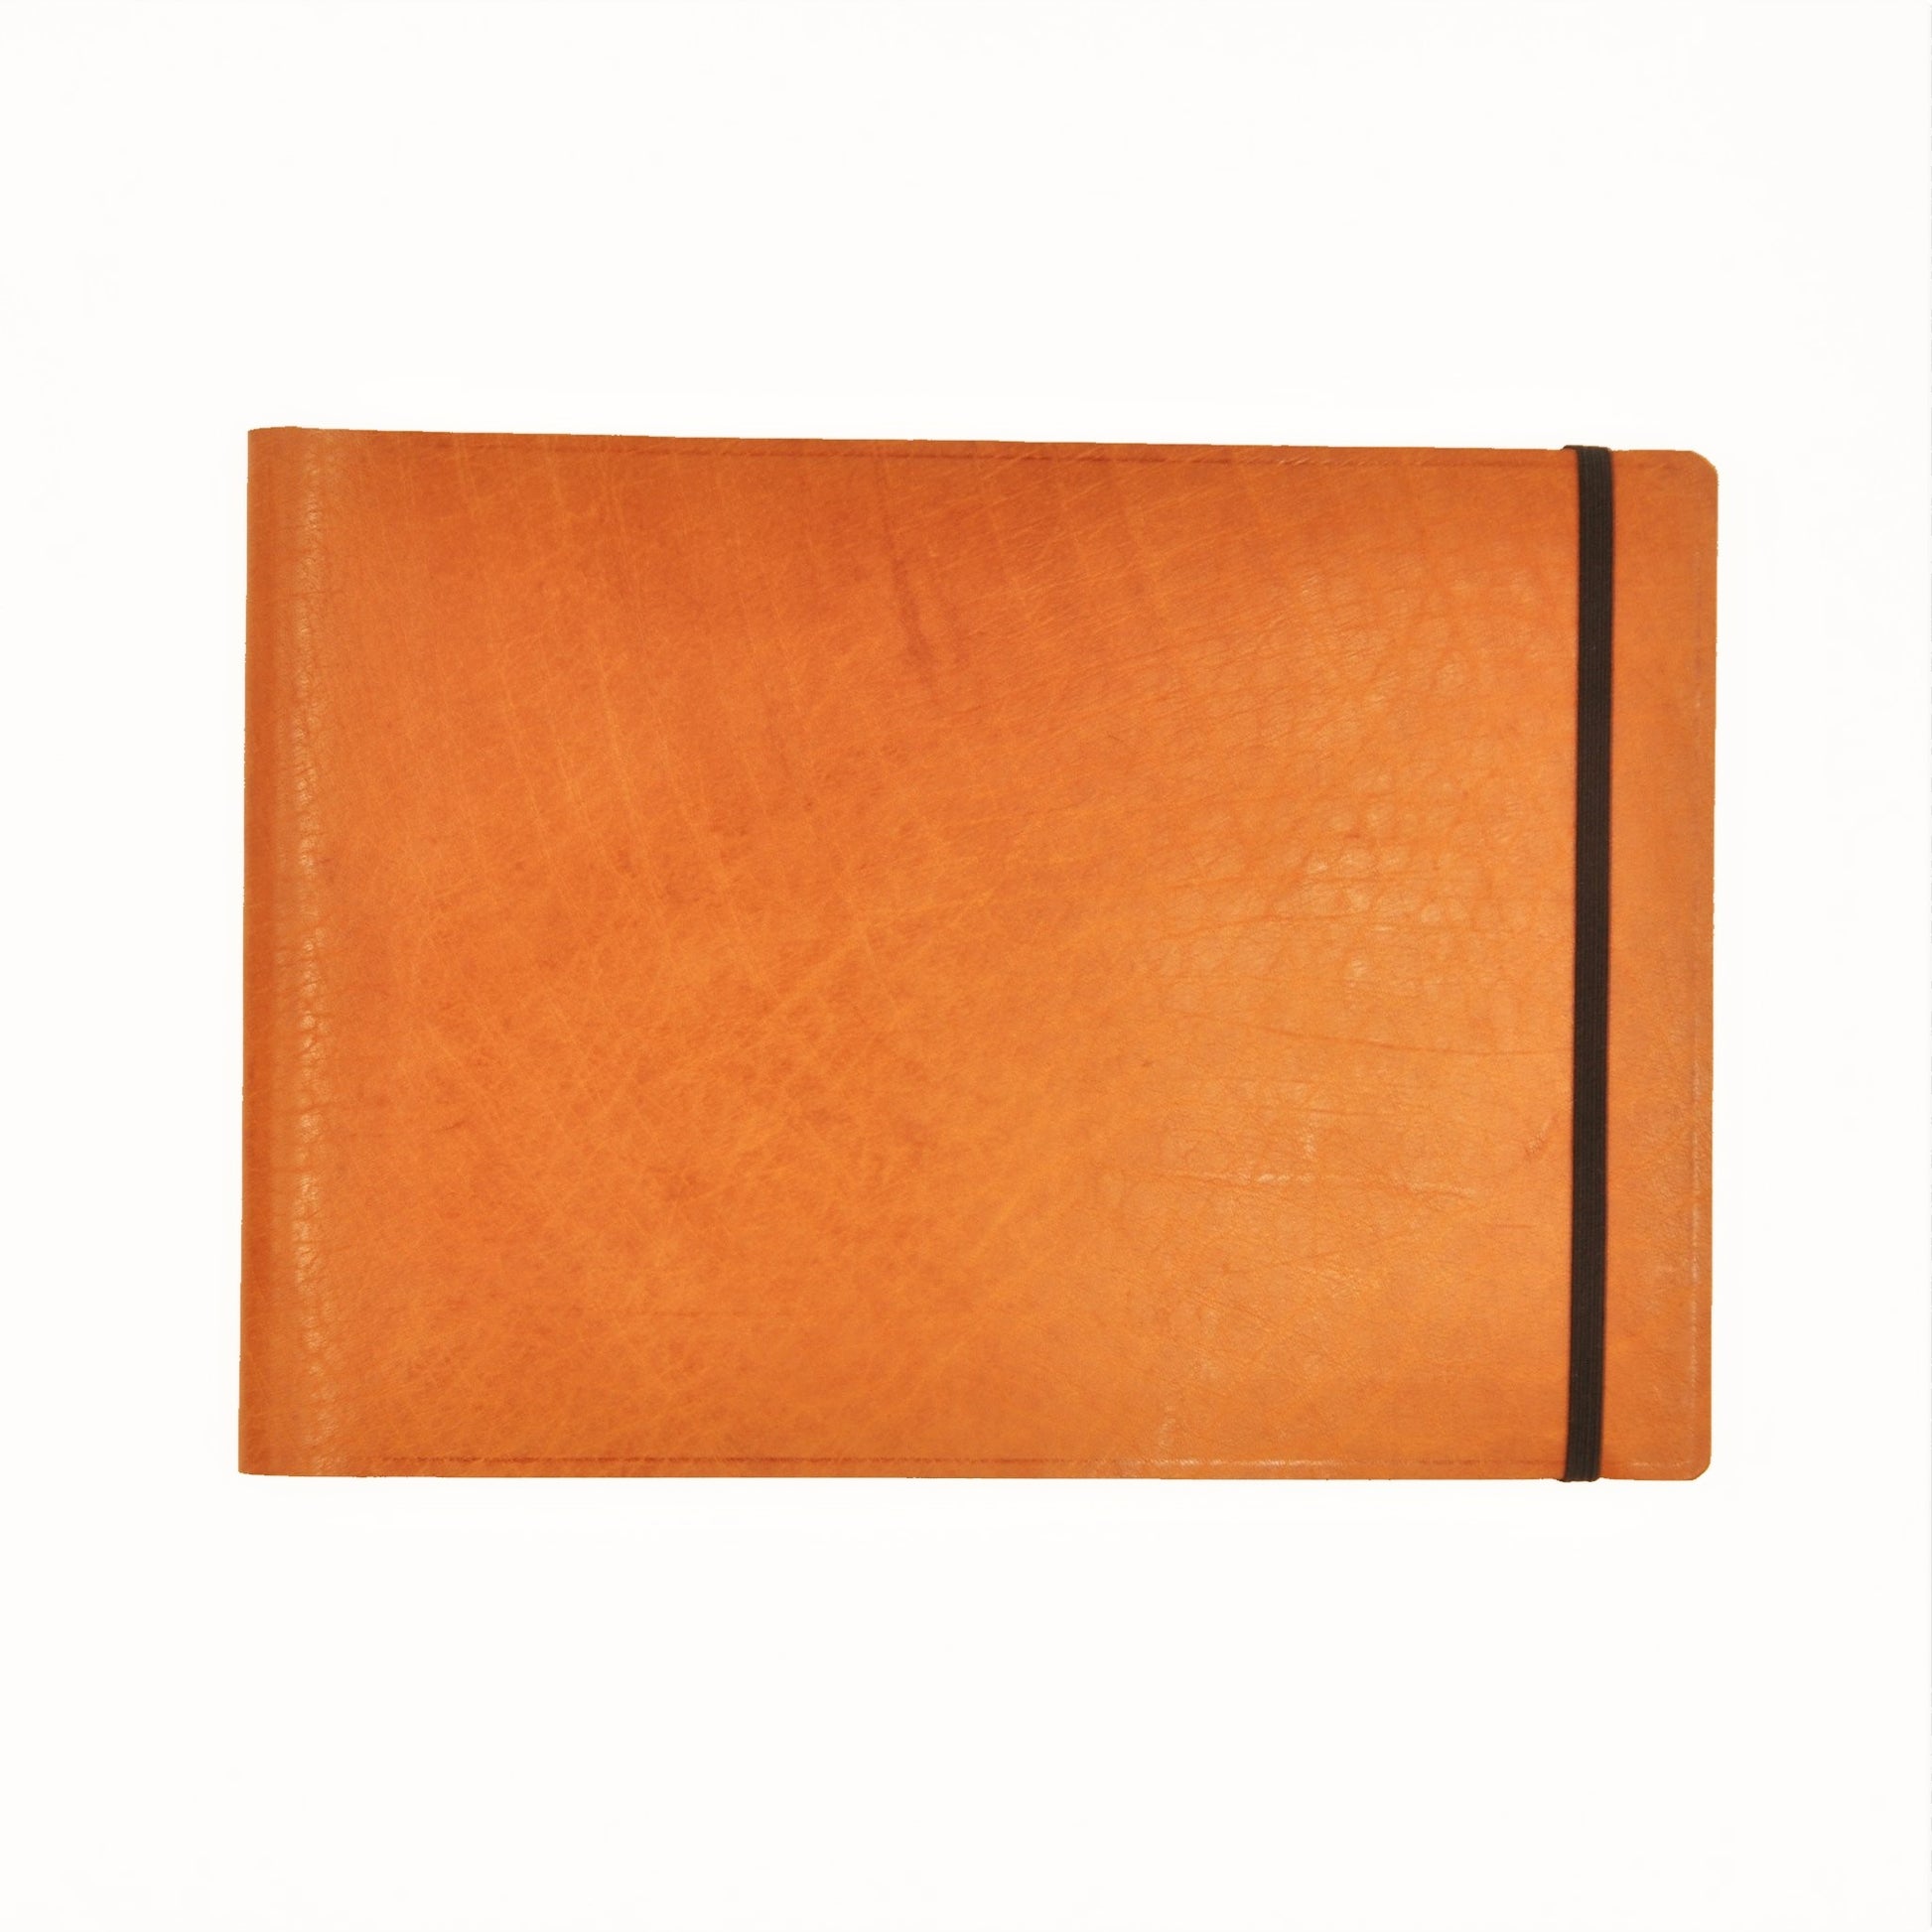 A5 size watercolor sketch pad in RUSTIC leather covers - Lotte's